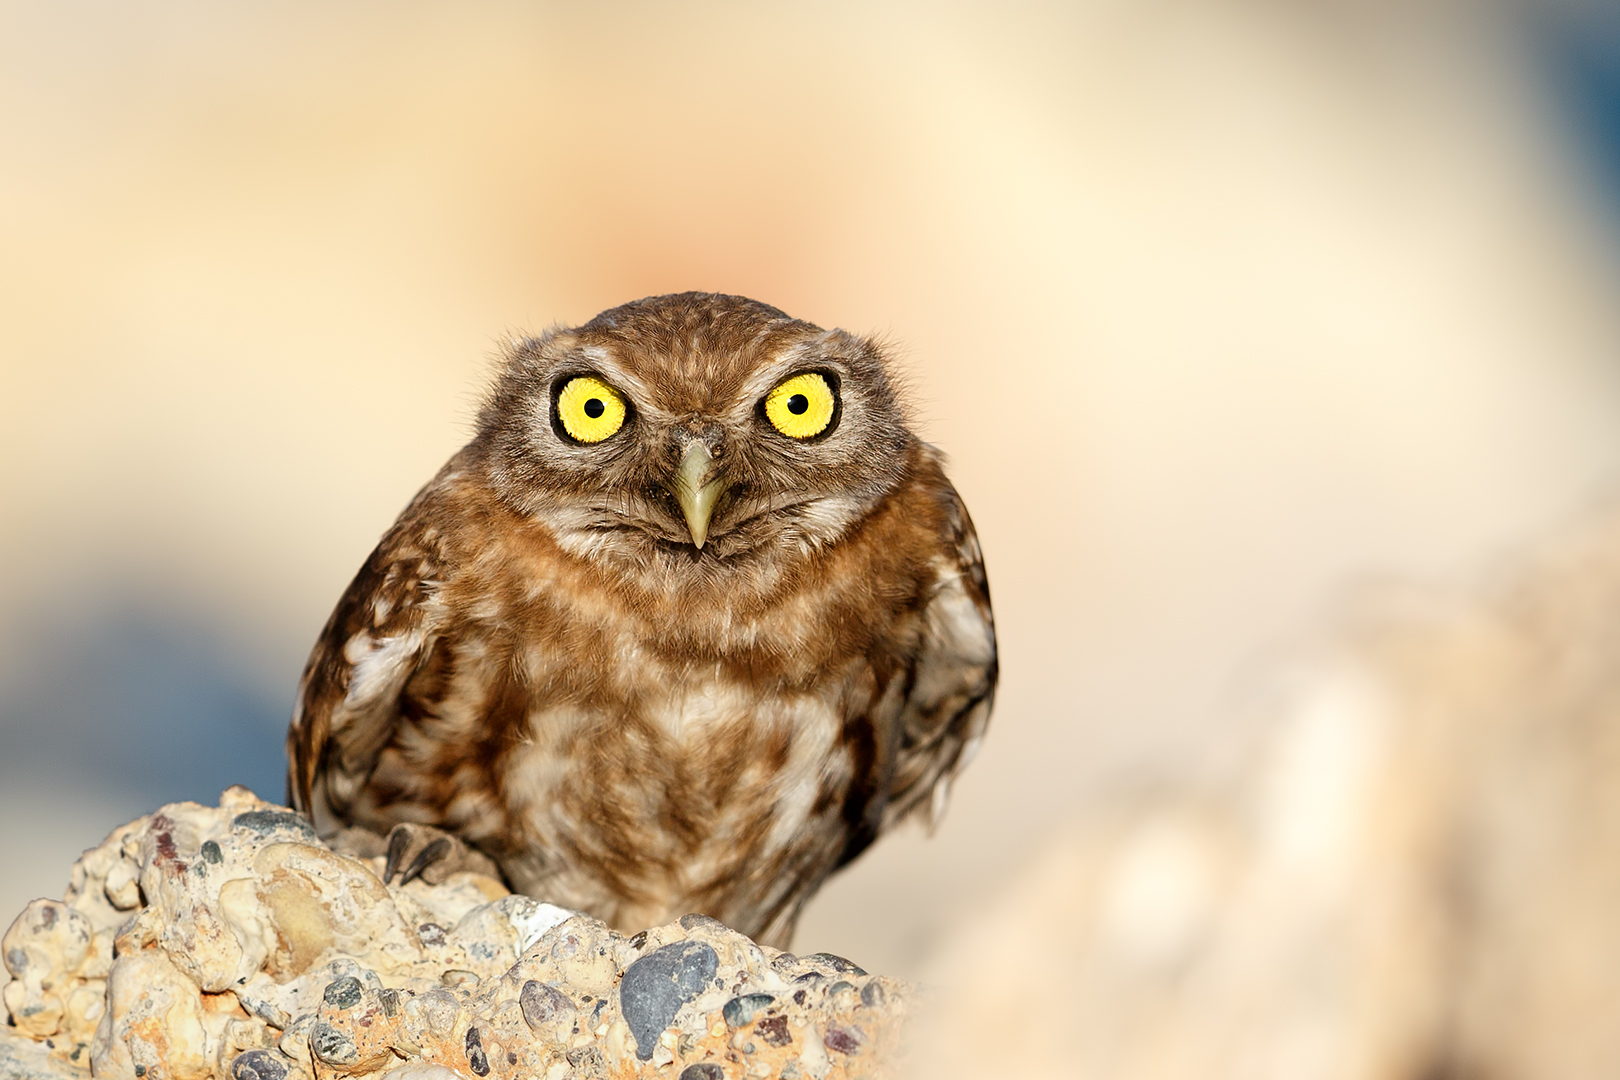 40 Angry Birds Who Don't Give A Hoot About What You Think